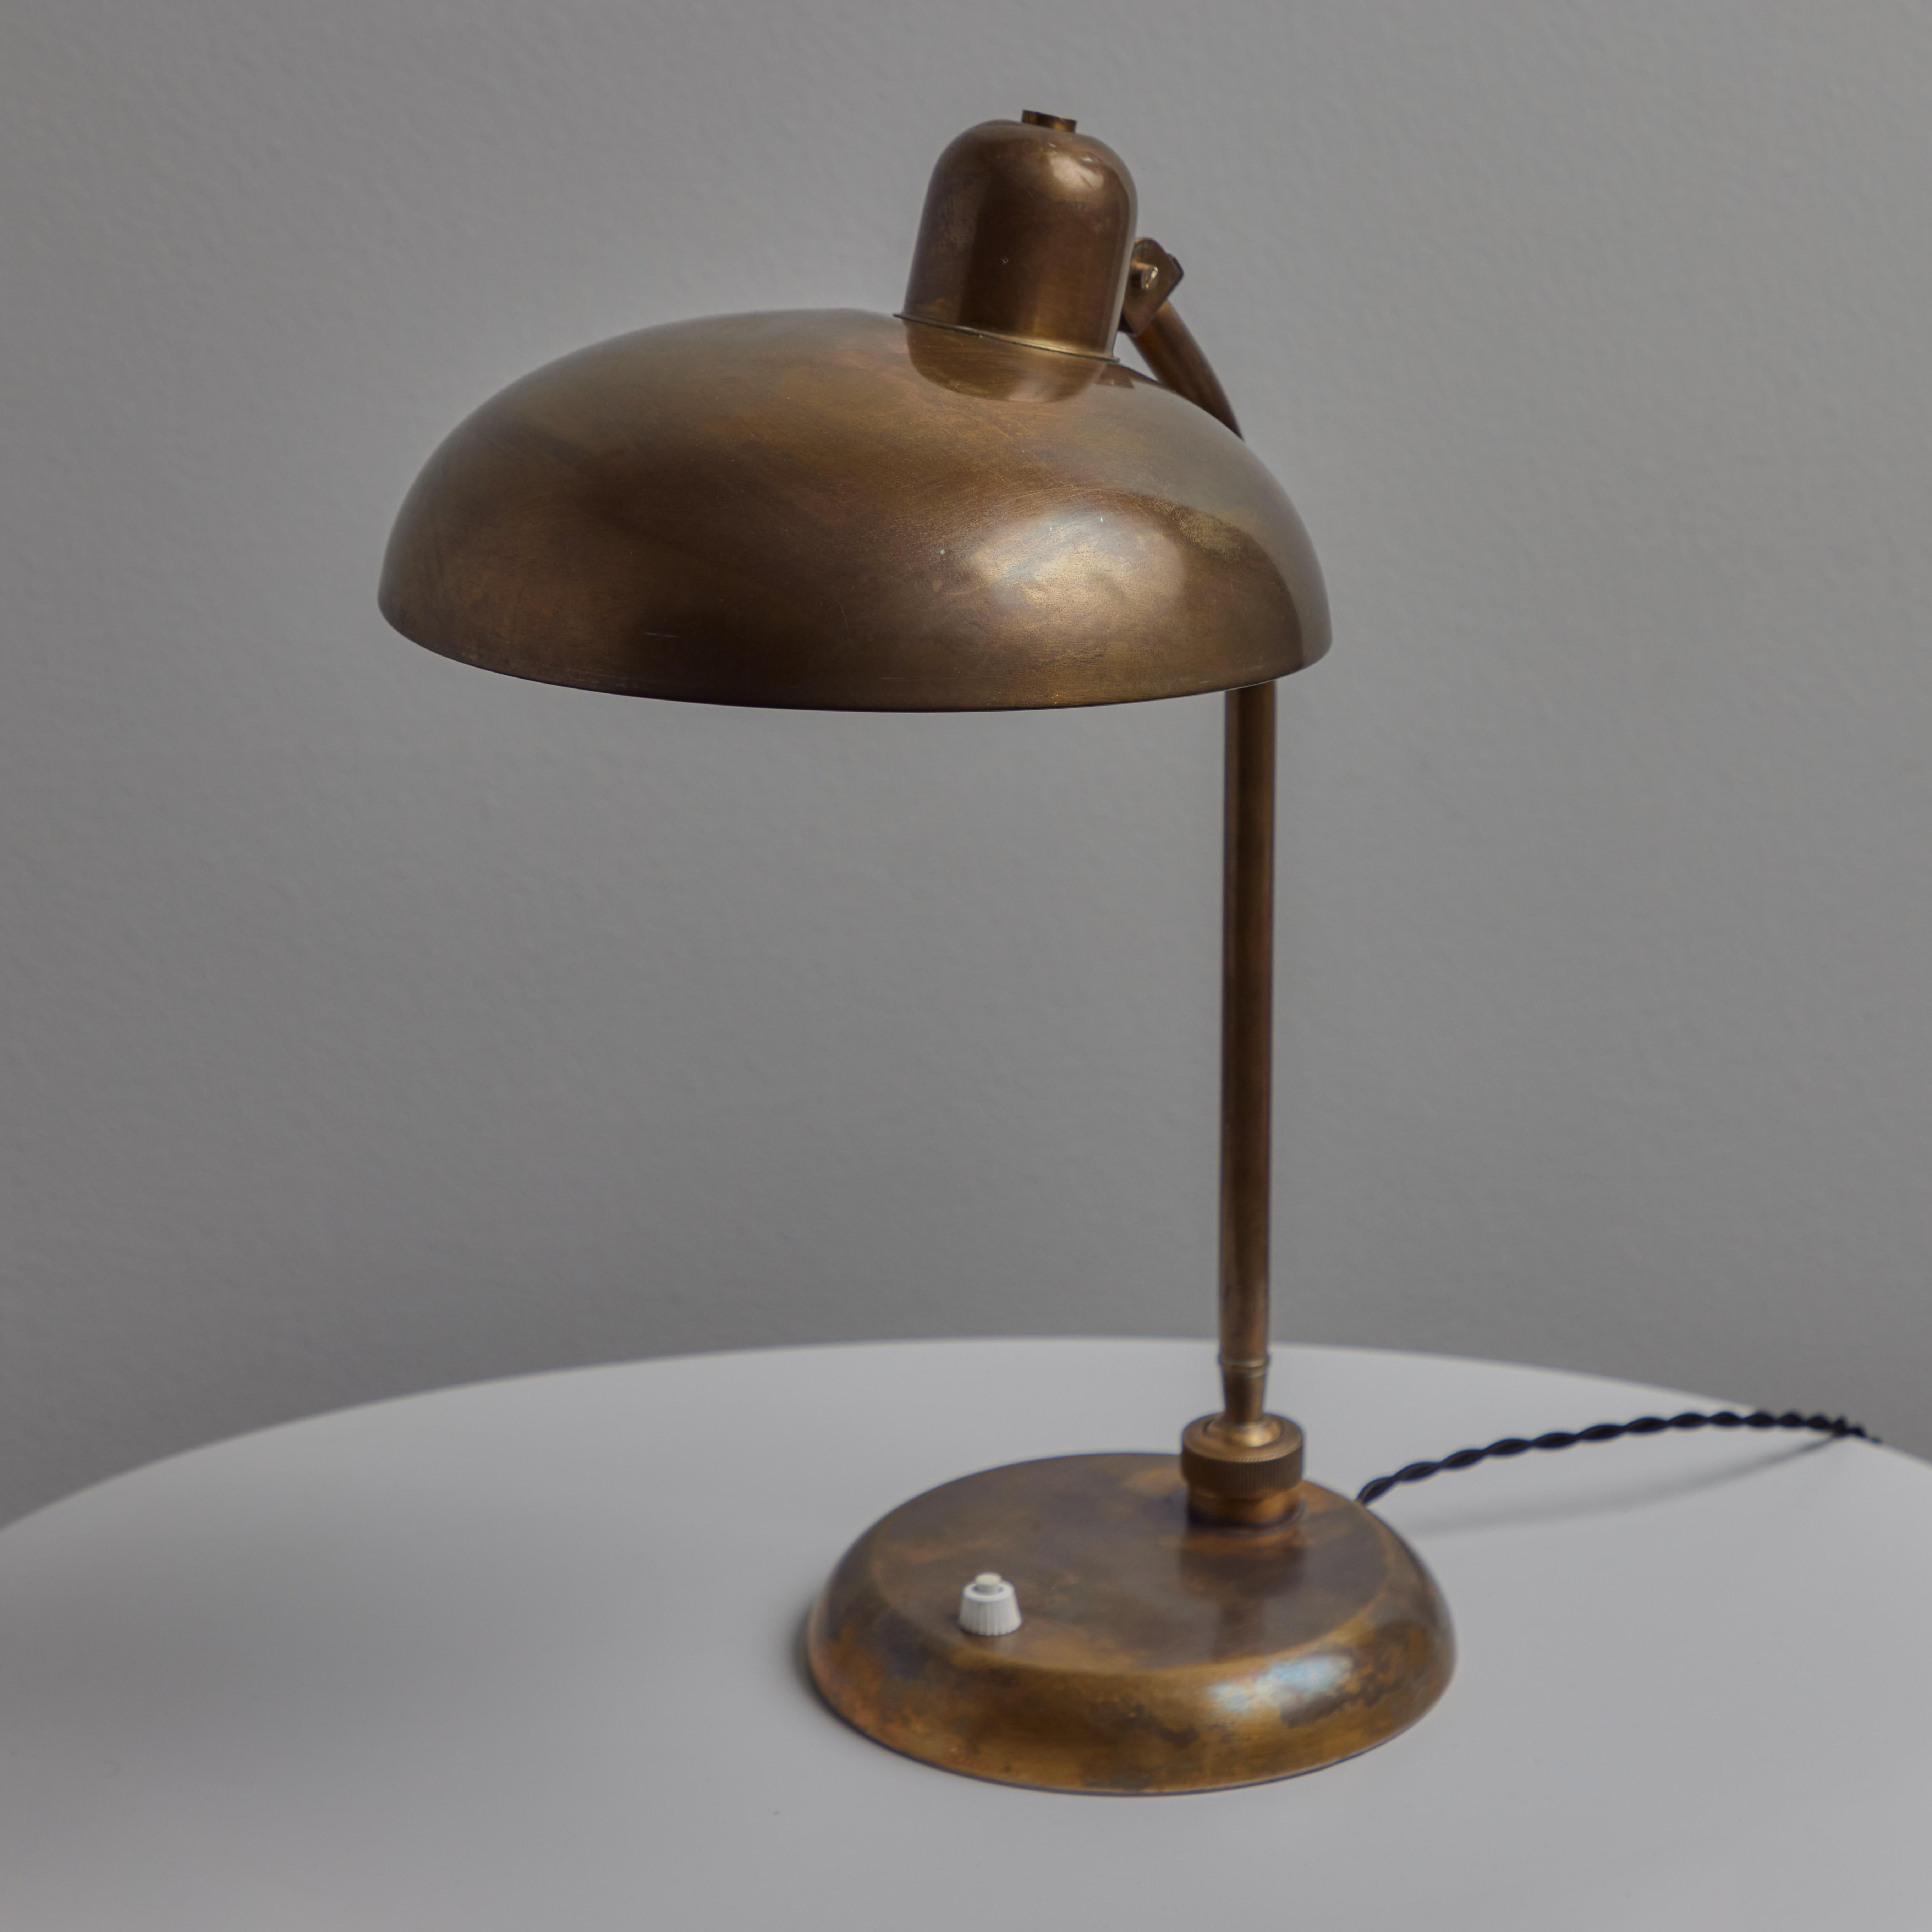 1940s Giovanni Michelucci patinated brass ministerial table lamp for Lariolux. Produced circa 1940 and executed in richly patinated brass with swiveling arm and rotating adjustable shade. Reminiscent of the early designs of Kaiser Idell. An elegant